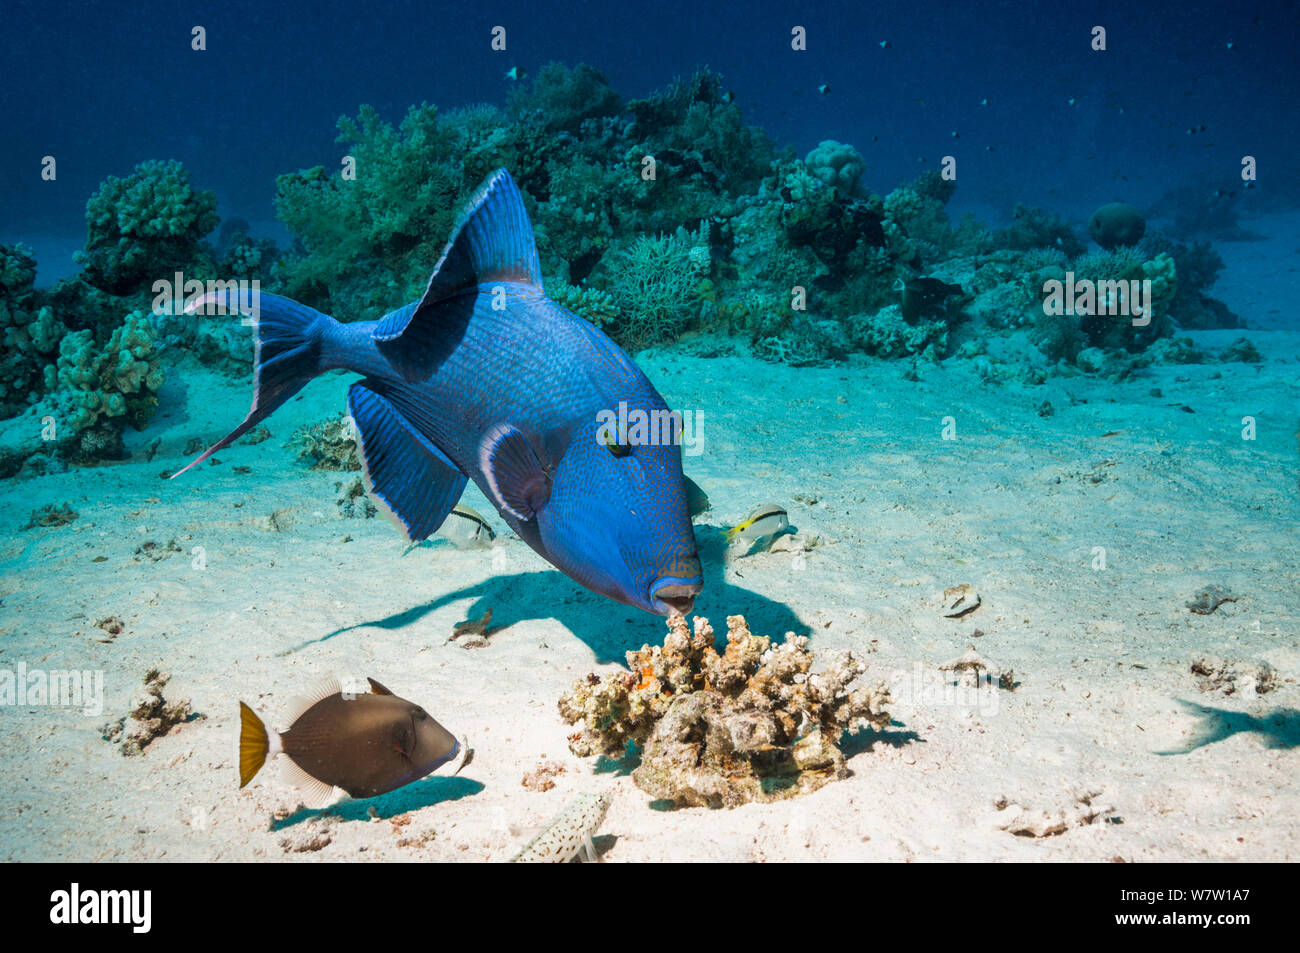 Blue triggerfish (Pseudobalistes fuscus) grubbing for food with a Bluethroat or Whitetail triggerfish (Sufflamen albicaudatus) keeping a close watch for escaping prey.  Egypt, Red Sea. Stock Photo